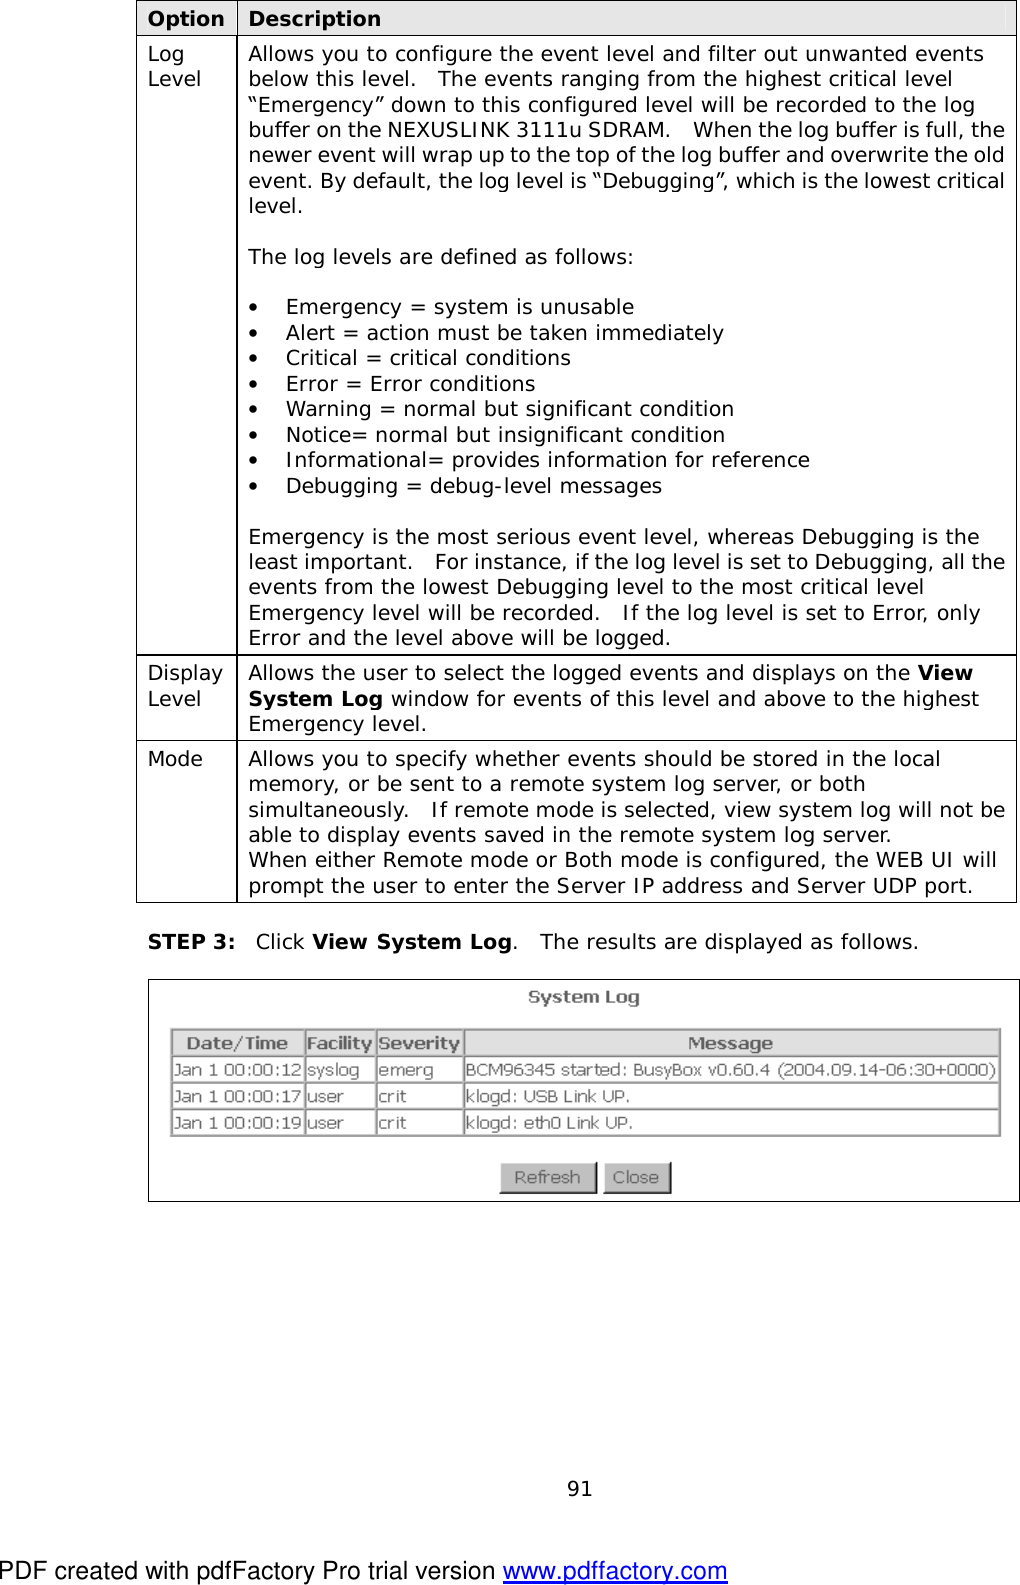  91 Option Description Log Level  Allows you to configure the event level and filter out unwanted events below this level.  The events ranging from the highest critical level “Emergency” down to this configured level will be recorded to the log buffer on the NEXUSLINK 3111u SDRAM.  When the log buffer is full, the newer event will wrap up to the top of the log buffer and overwrite the old event. By default, the log level is “Debugging”, which is the lowest critical level.   The log levels are defined as follows:  •  Emergency = system is unusable •  Alert = action must be taken immediately •  Critical = critical conditions •  Error = Error conditions •  Warning = normal but significant condition •  Notice= normal but insignificant condition •  Informational= provides information for reference •  Debugging = debug-level messages  Emergency is the most serious event level, whereas Debugging is the least important.  For instance, if the log level is set to Debugging, all the events from the lowest Debugging level to the most critical level Emergency level will be recorded.  If the log level is set to Error, only Error and the level above will be logged. Display Level  Allows the user to select the logged events and displays on the View System Log window for events of this level and above to the highest Emergency level. Mode  Allows you to specify whether events should be stored in the local memory, or be sent to a remote system log server, or both simultaneously.  If remote mode is selected, view system log will not be able to display events saved in the remote system log server.   When either Remote mode or Both mode is configured, the WEB UI will prompt the user to enter the Server IP address and Server UDP port.  STEP 3:  Click View System Log.  The results are displayed as follows.   PDF created with pdfFactory Pro trial version www.pdffactory.com